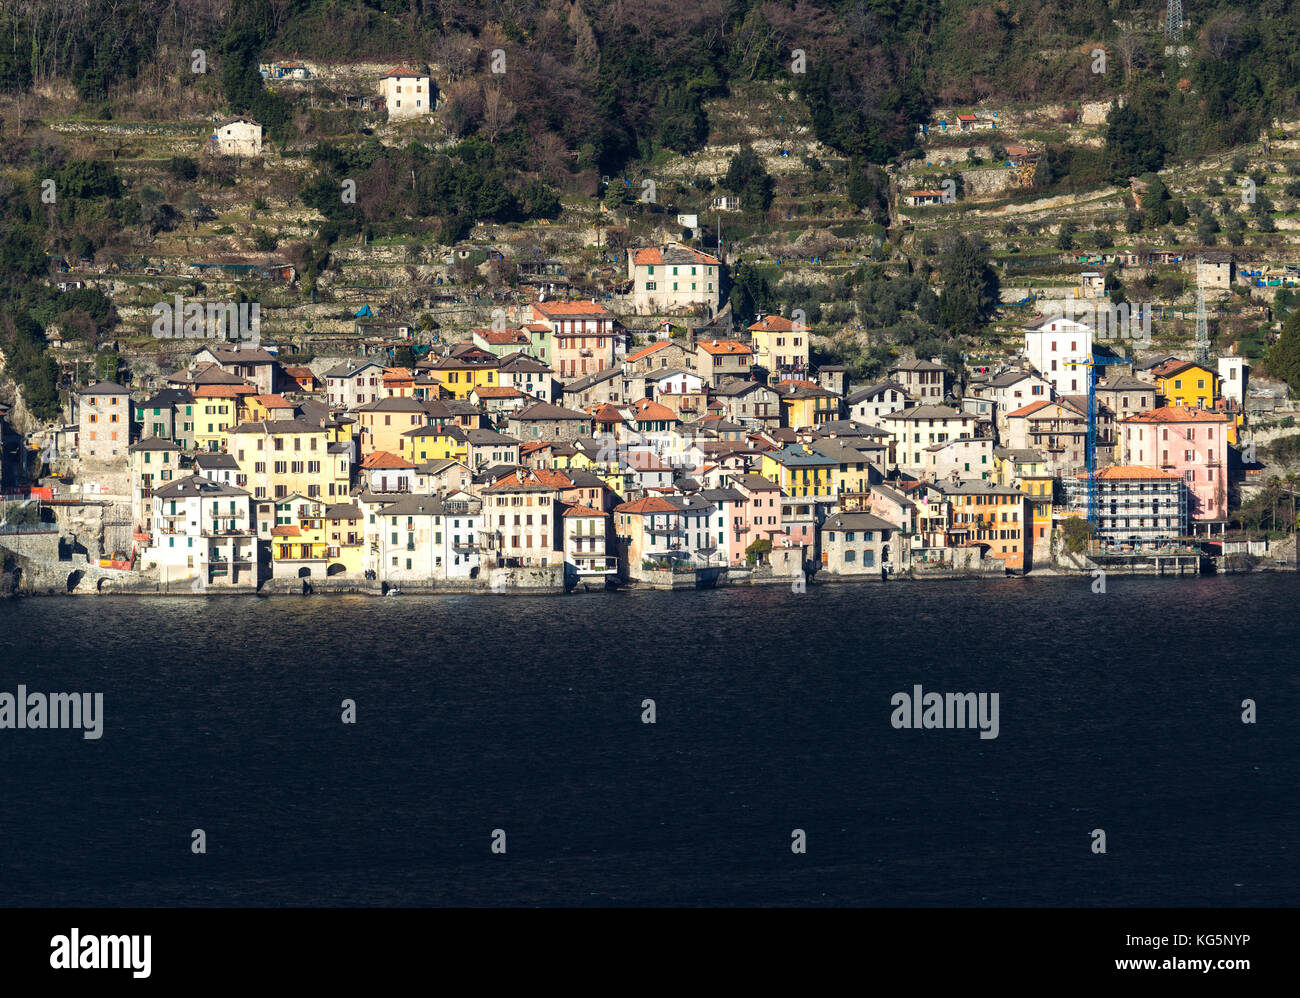 The town of Brienno, view from the opposite shore of the lake como district, lombardy, Italy, europe Stock Photo